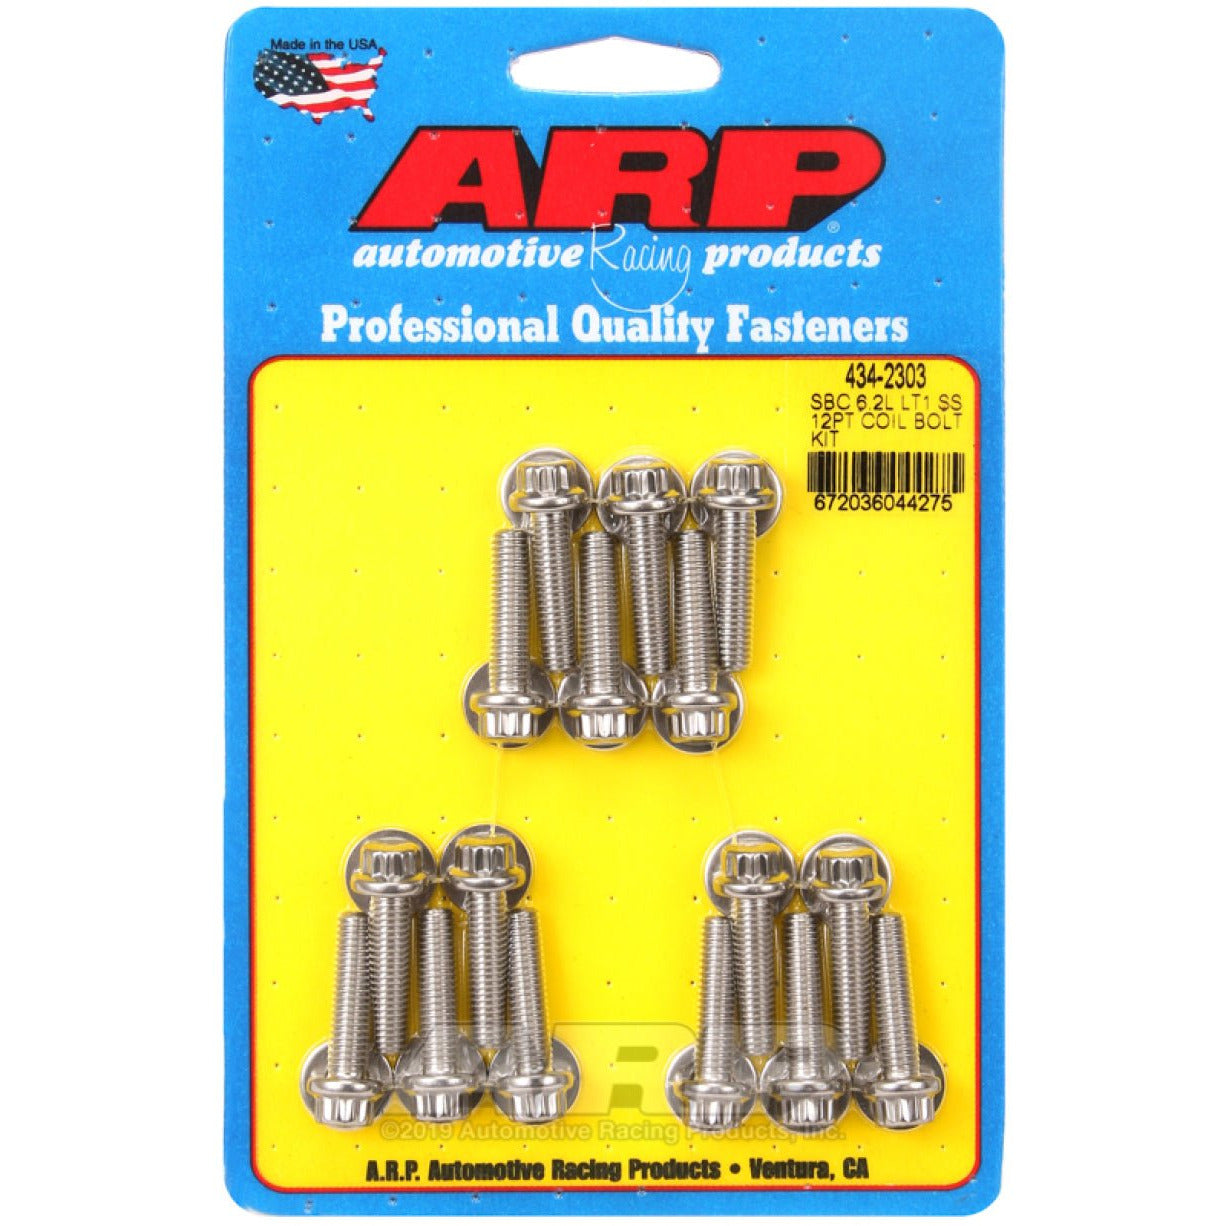 ARP Chevy LT1 6.2L Ignition Coil 12pt Stainless Steel Bolt Kit ARP Hardware Kits - Other